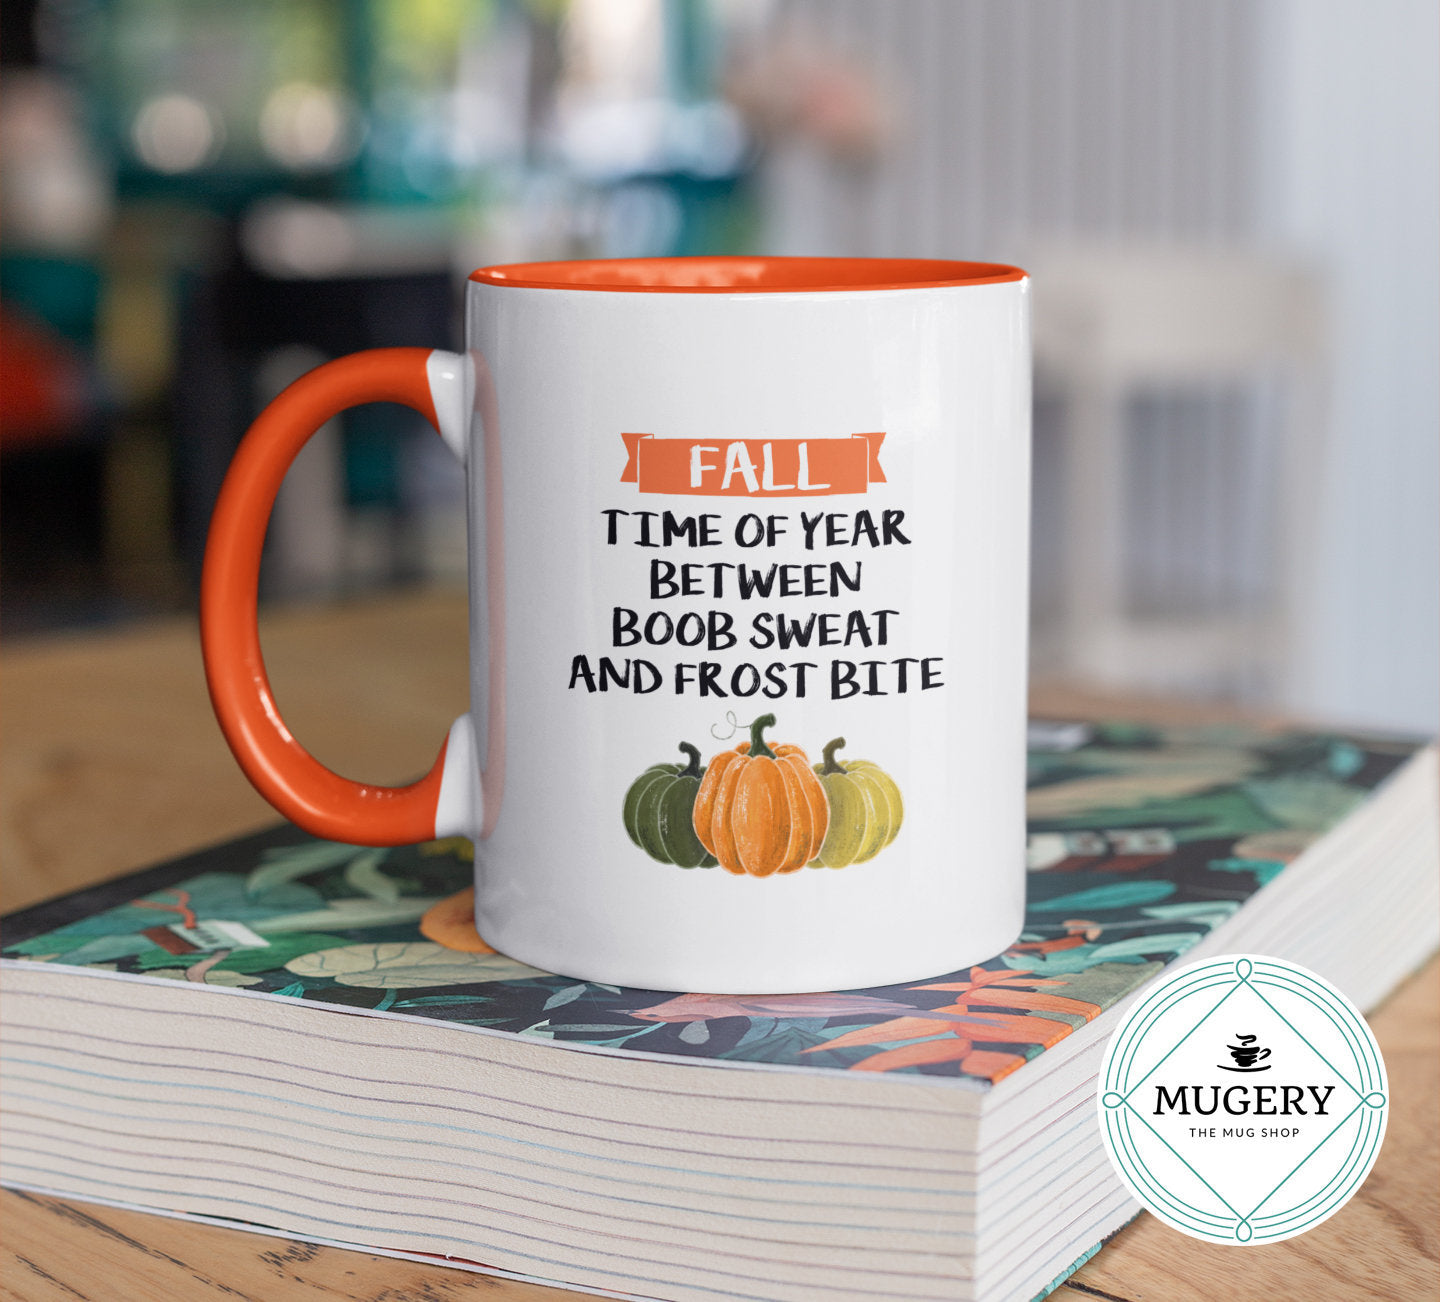 Fall - Time Between Boob Sweat and Frost Bite Mug